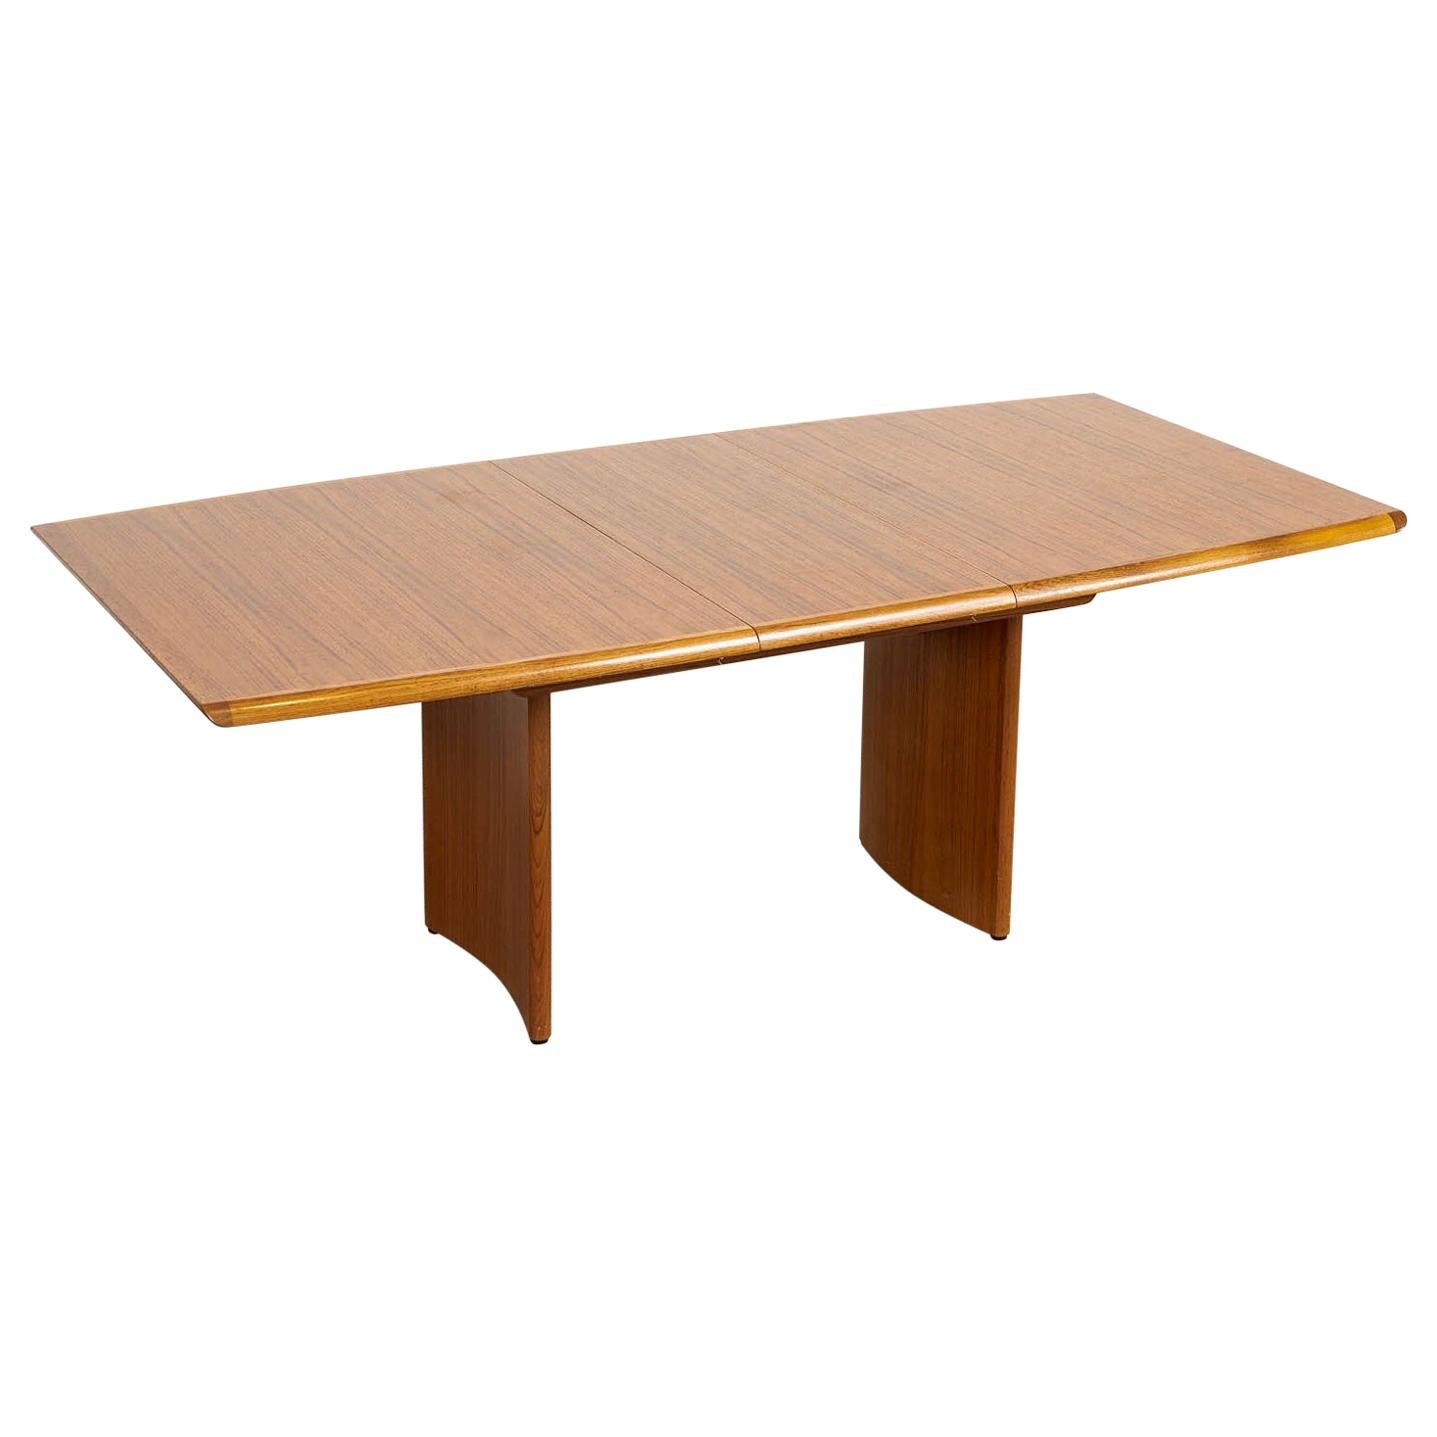 Vintage Danish Modern Teak Wood Extendable Dining Table with Two Leaves, 1960s For Sale